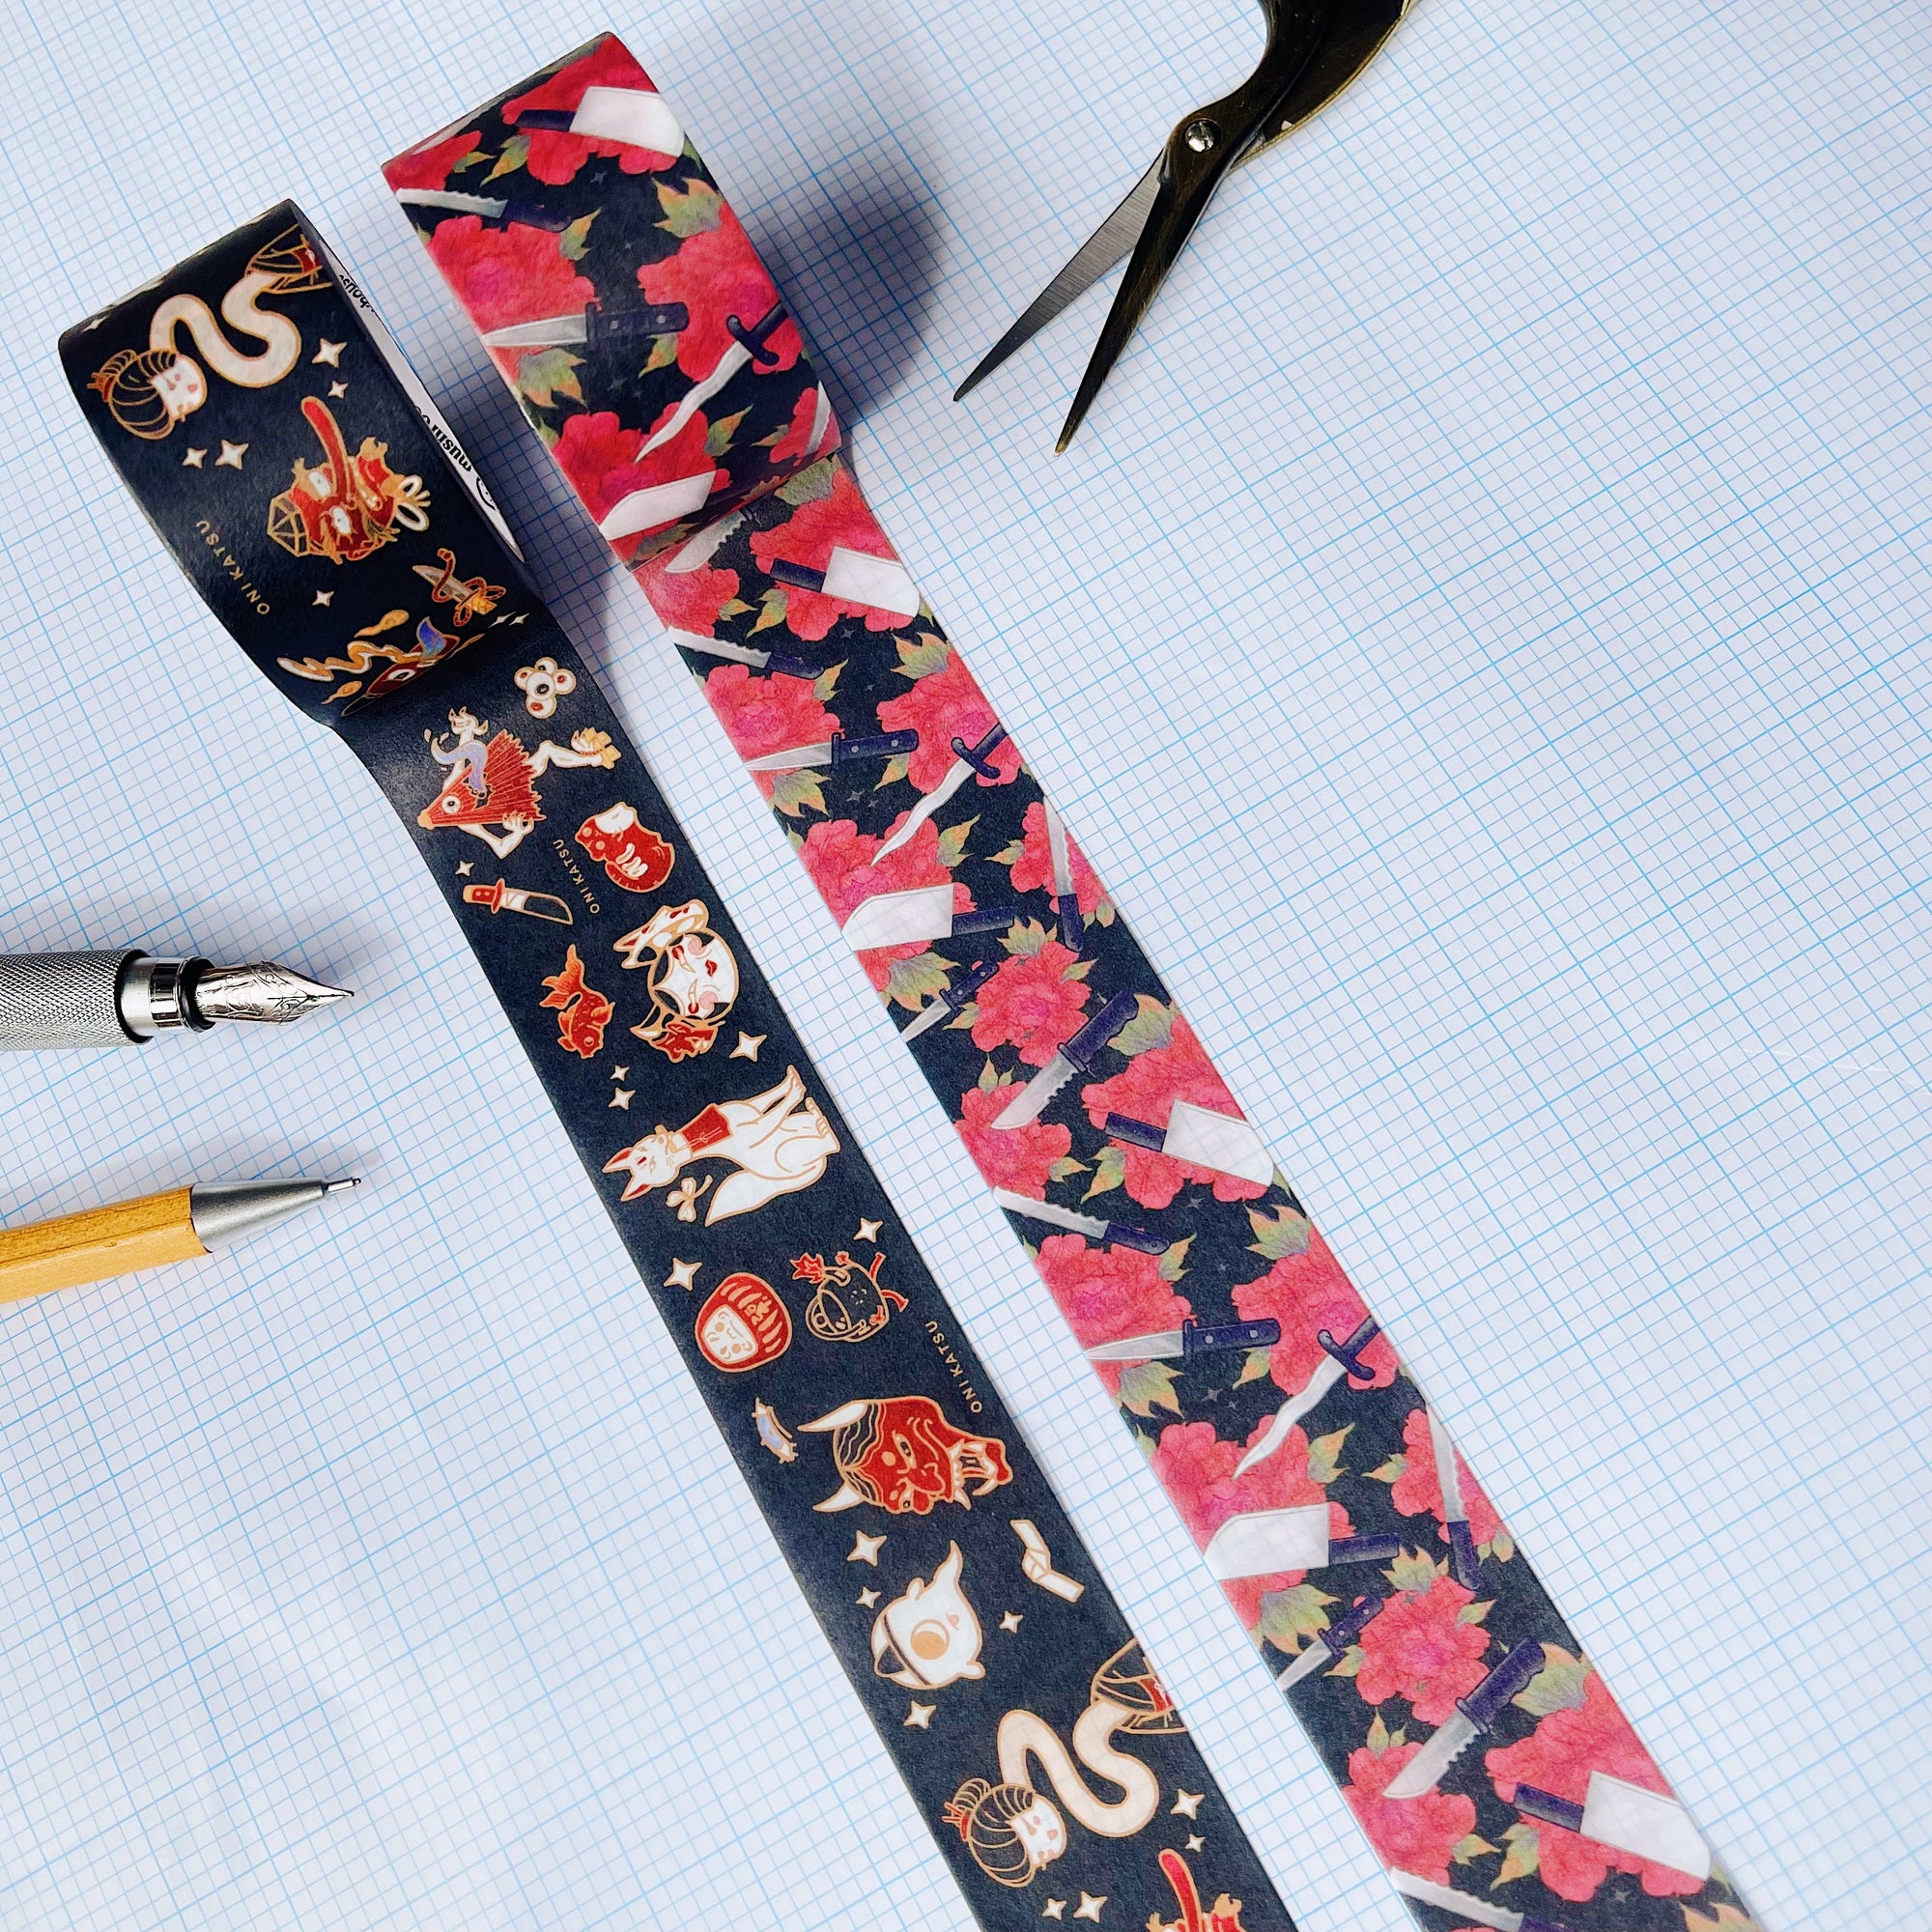 Knives and Flowers Washi Tape